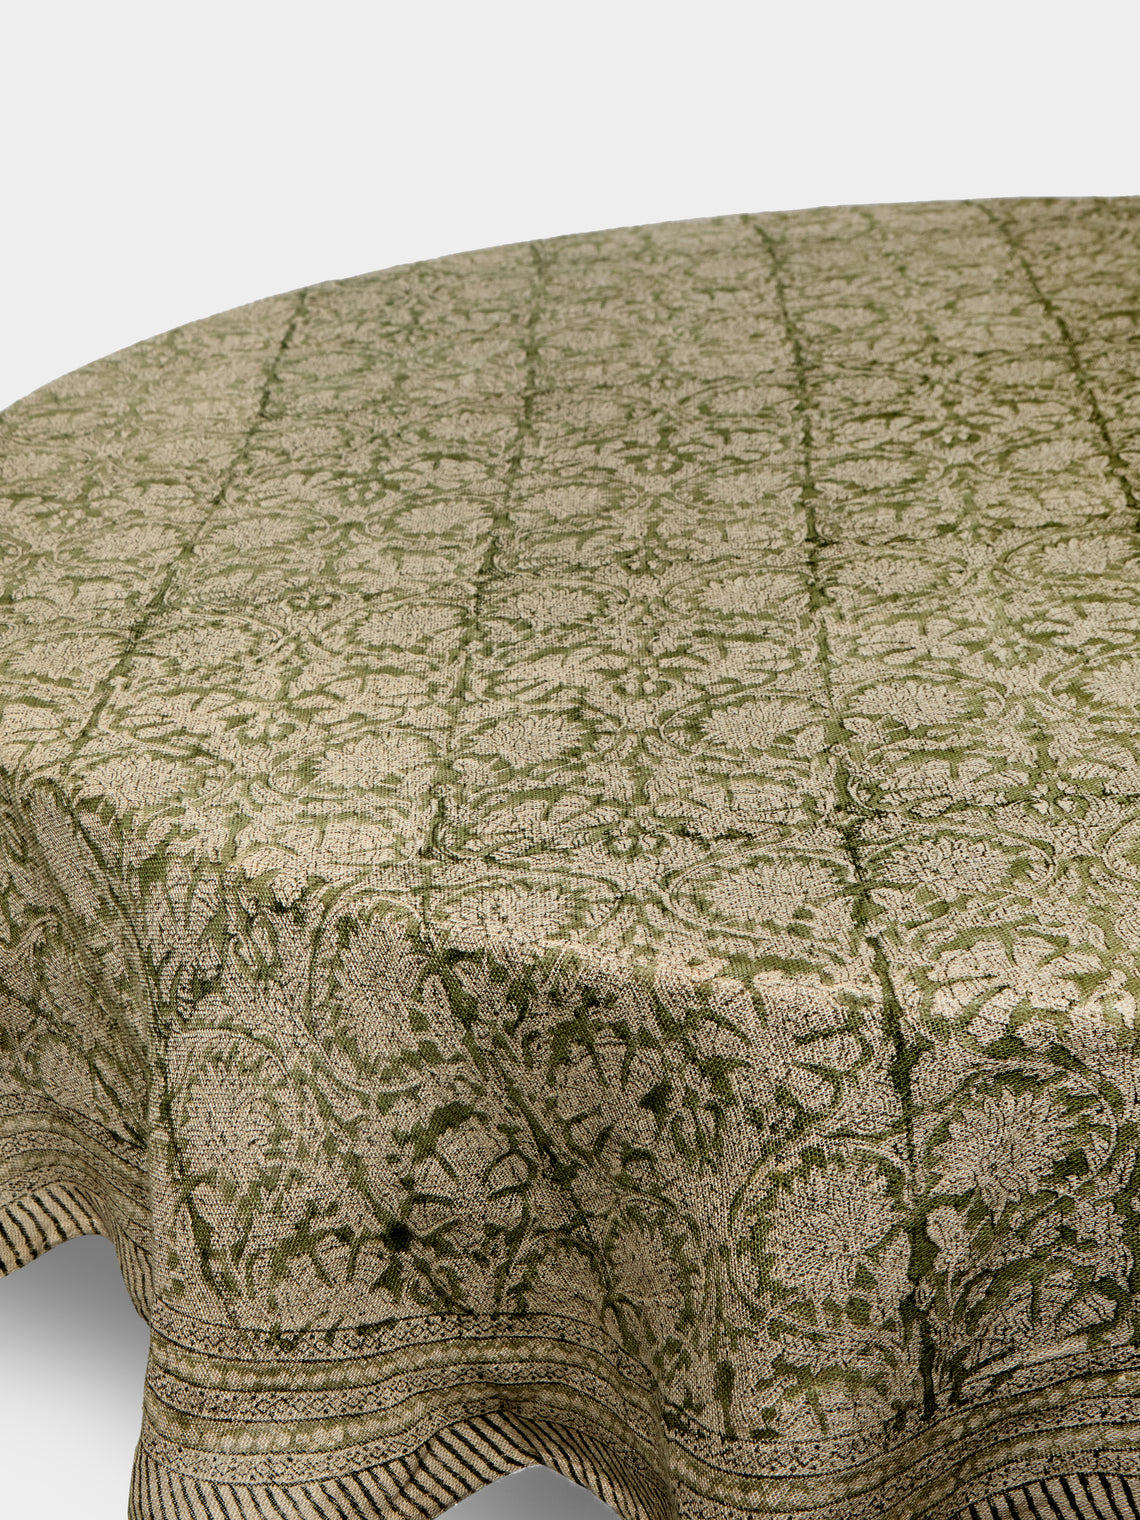 Chamois - Big Paisley Block-Printed Linen Round Tablecloth -  - ABASK